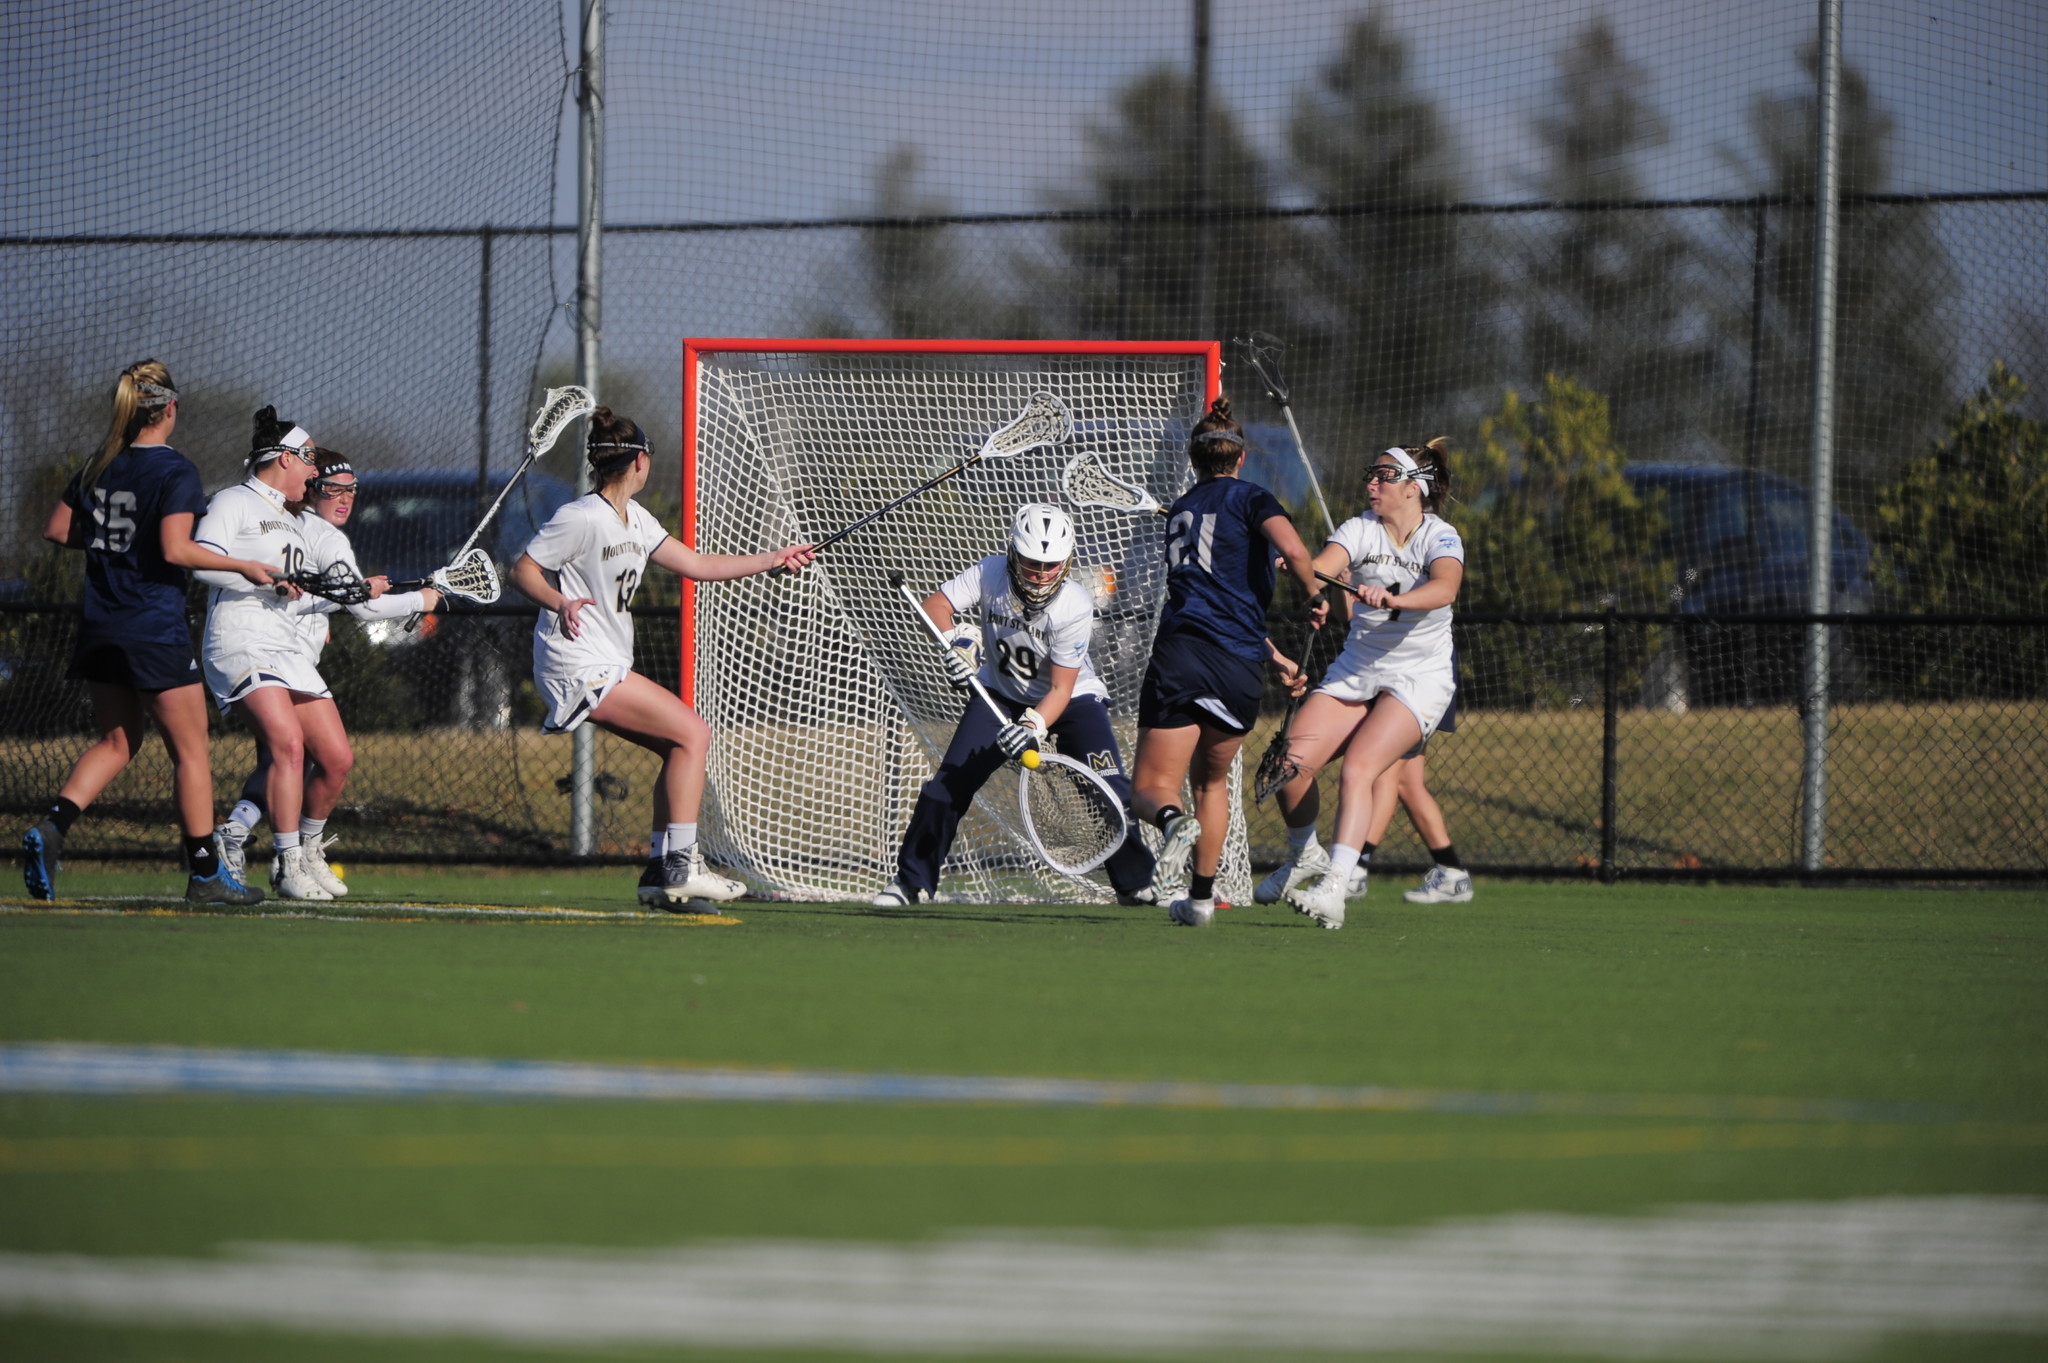 Women's lacrosse notebook: Mount St. Mary's going for tourney berth - Baltimore Sun2048 x 1363